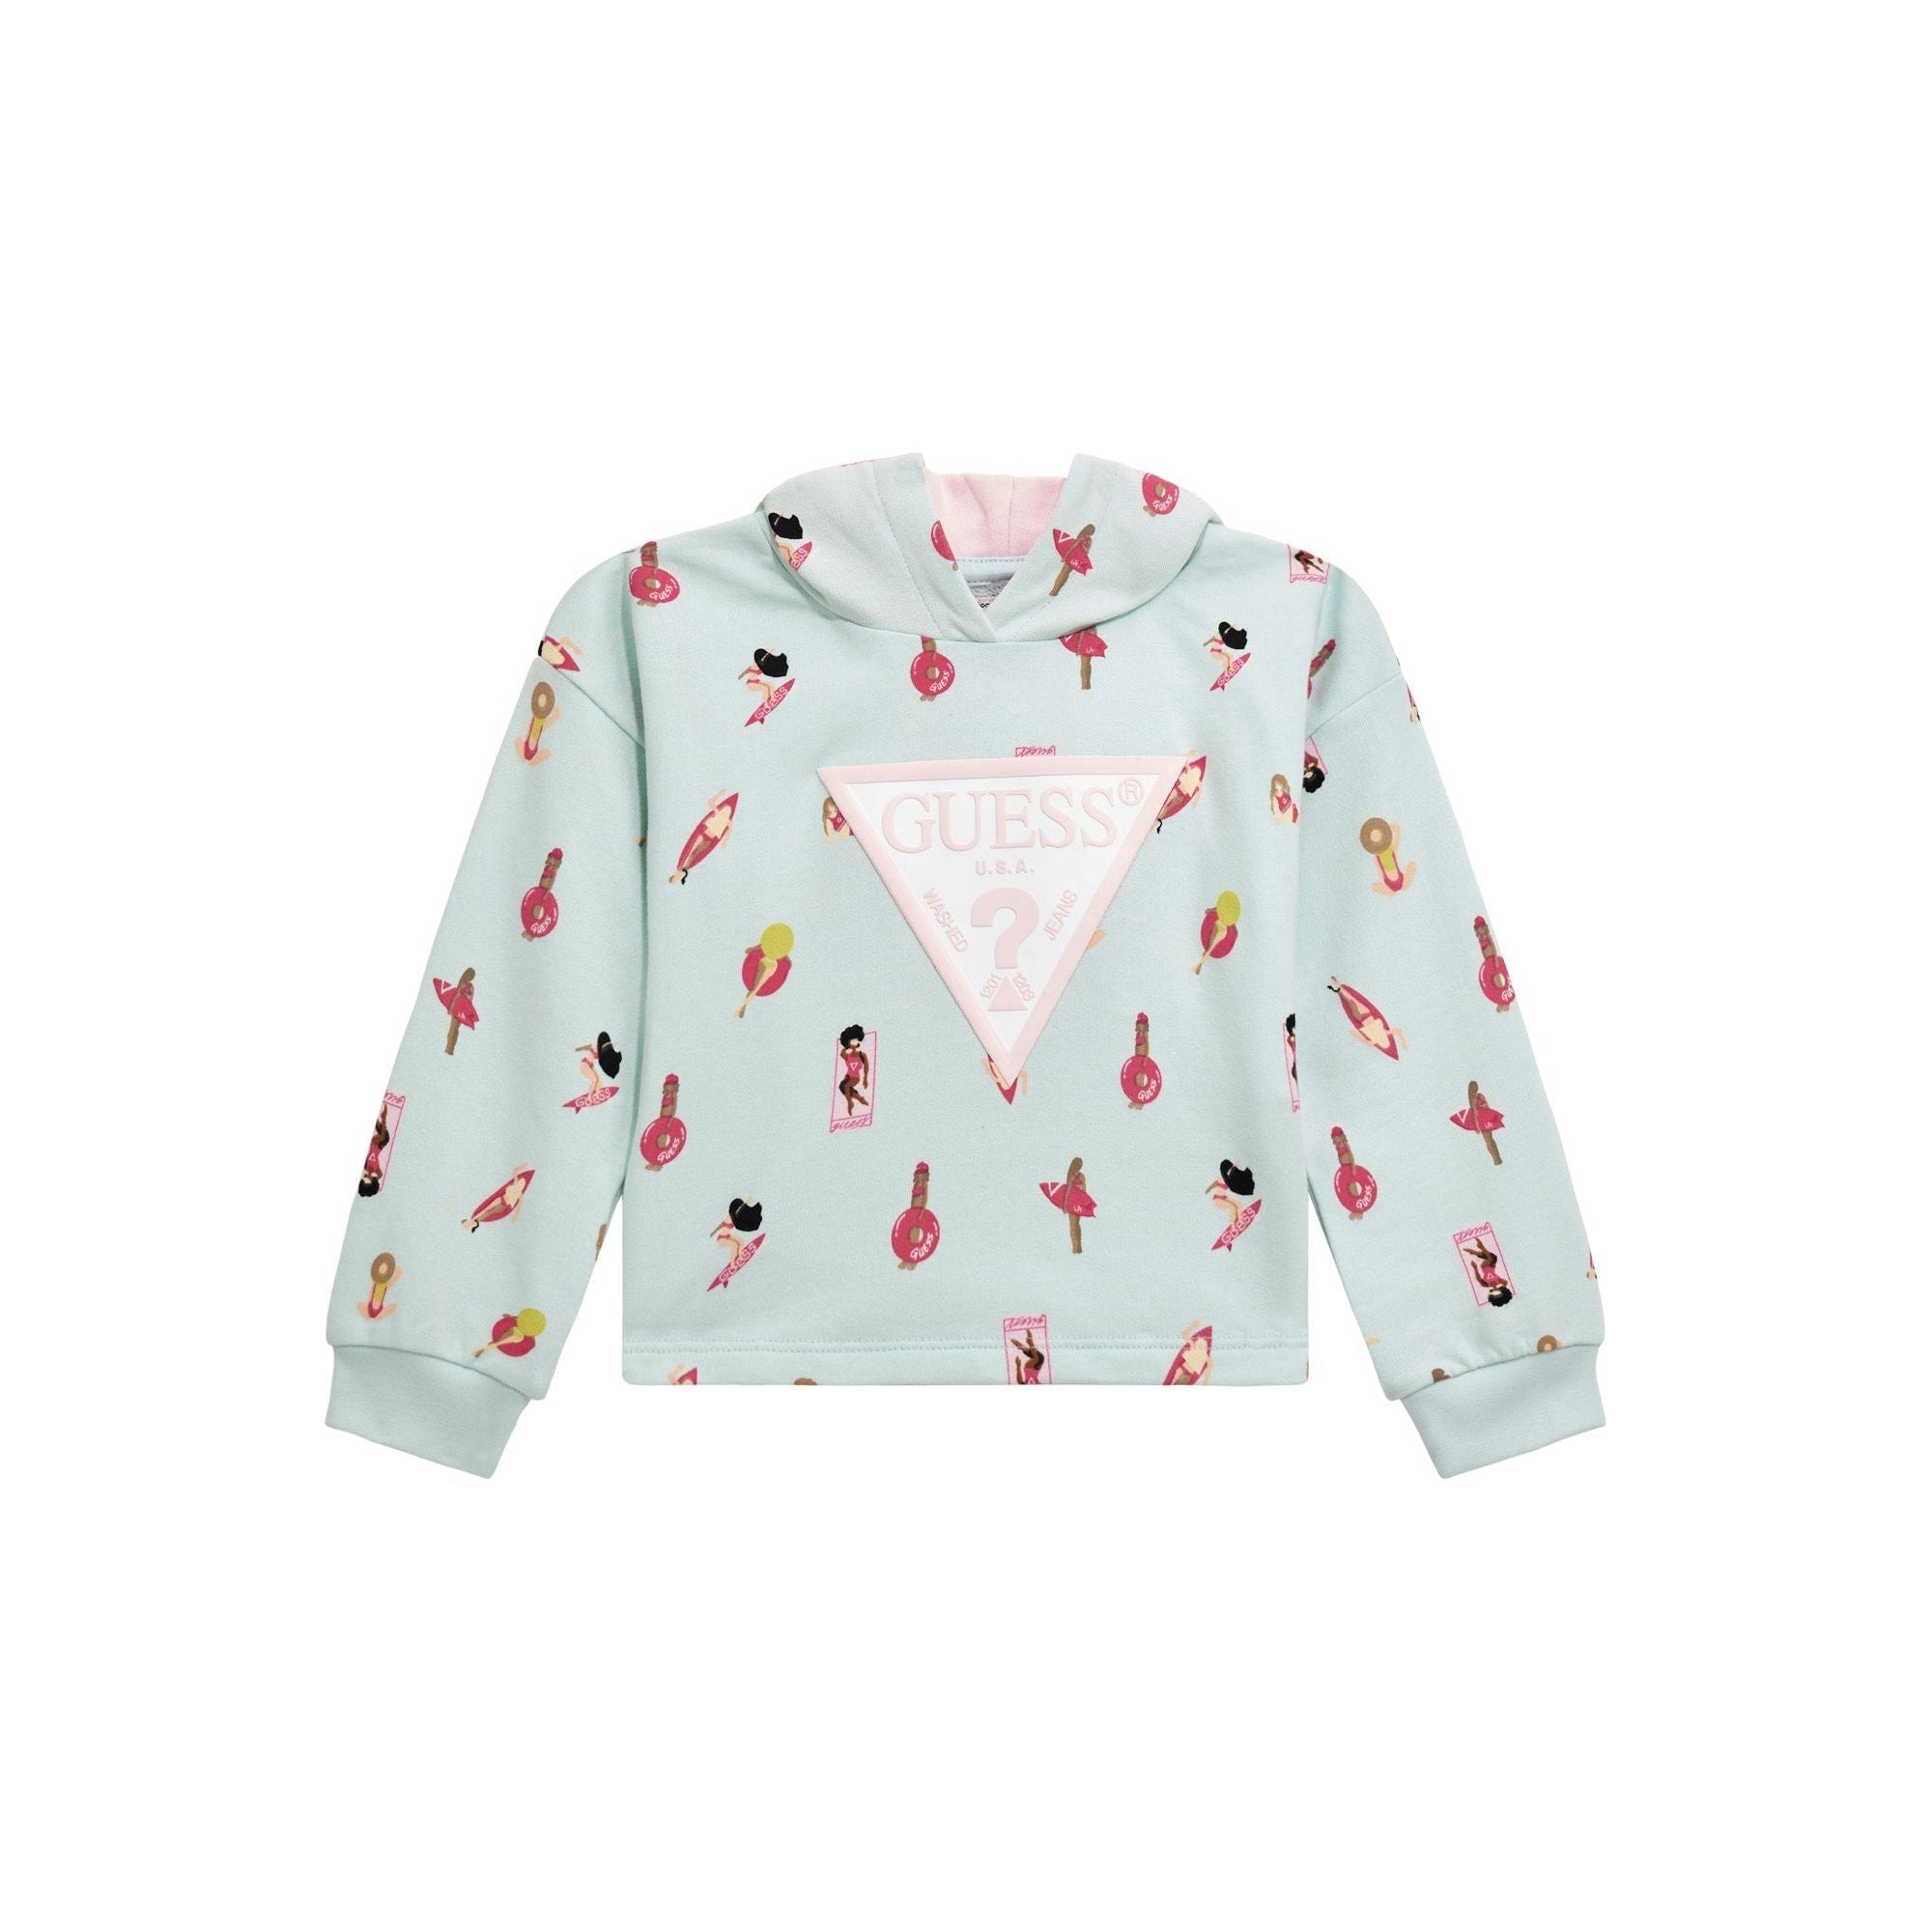 Guess - Toddler Girls Hoodie in Summer Days